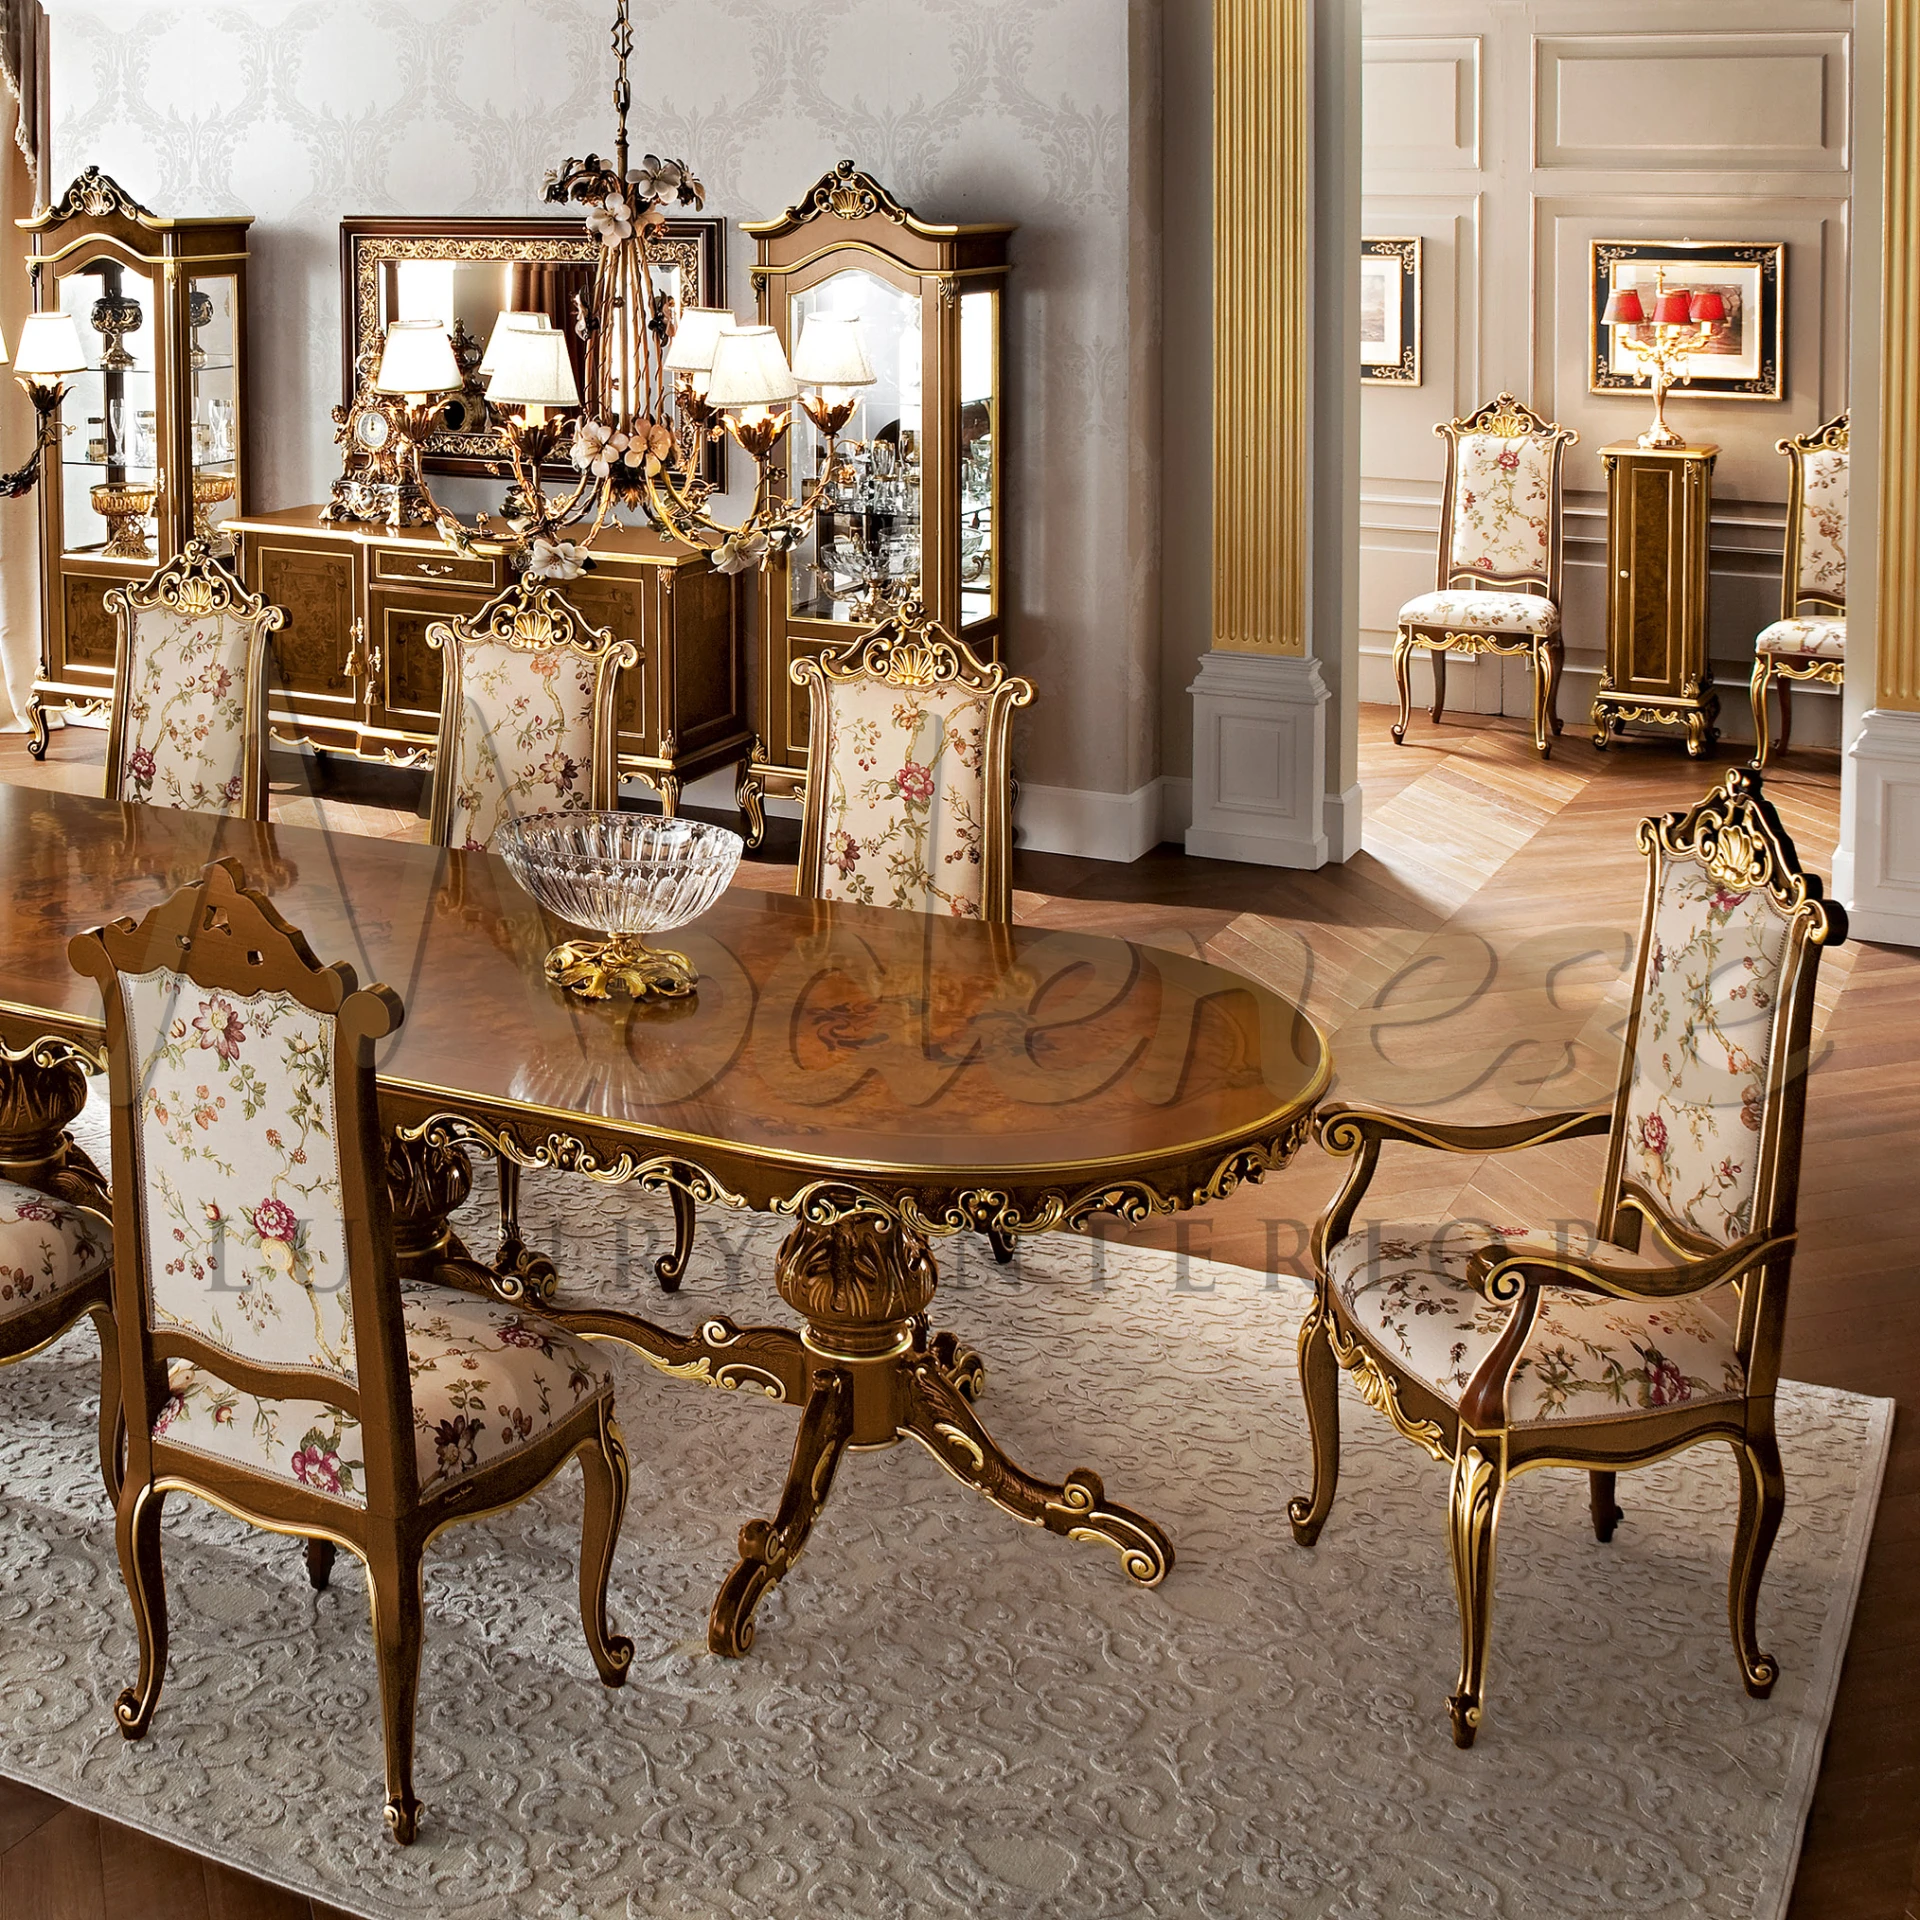 Exquisite dining table for high-end palaces, featuring gold leaf applications, walnut finish, and elegant floral upholstery.